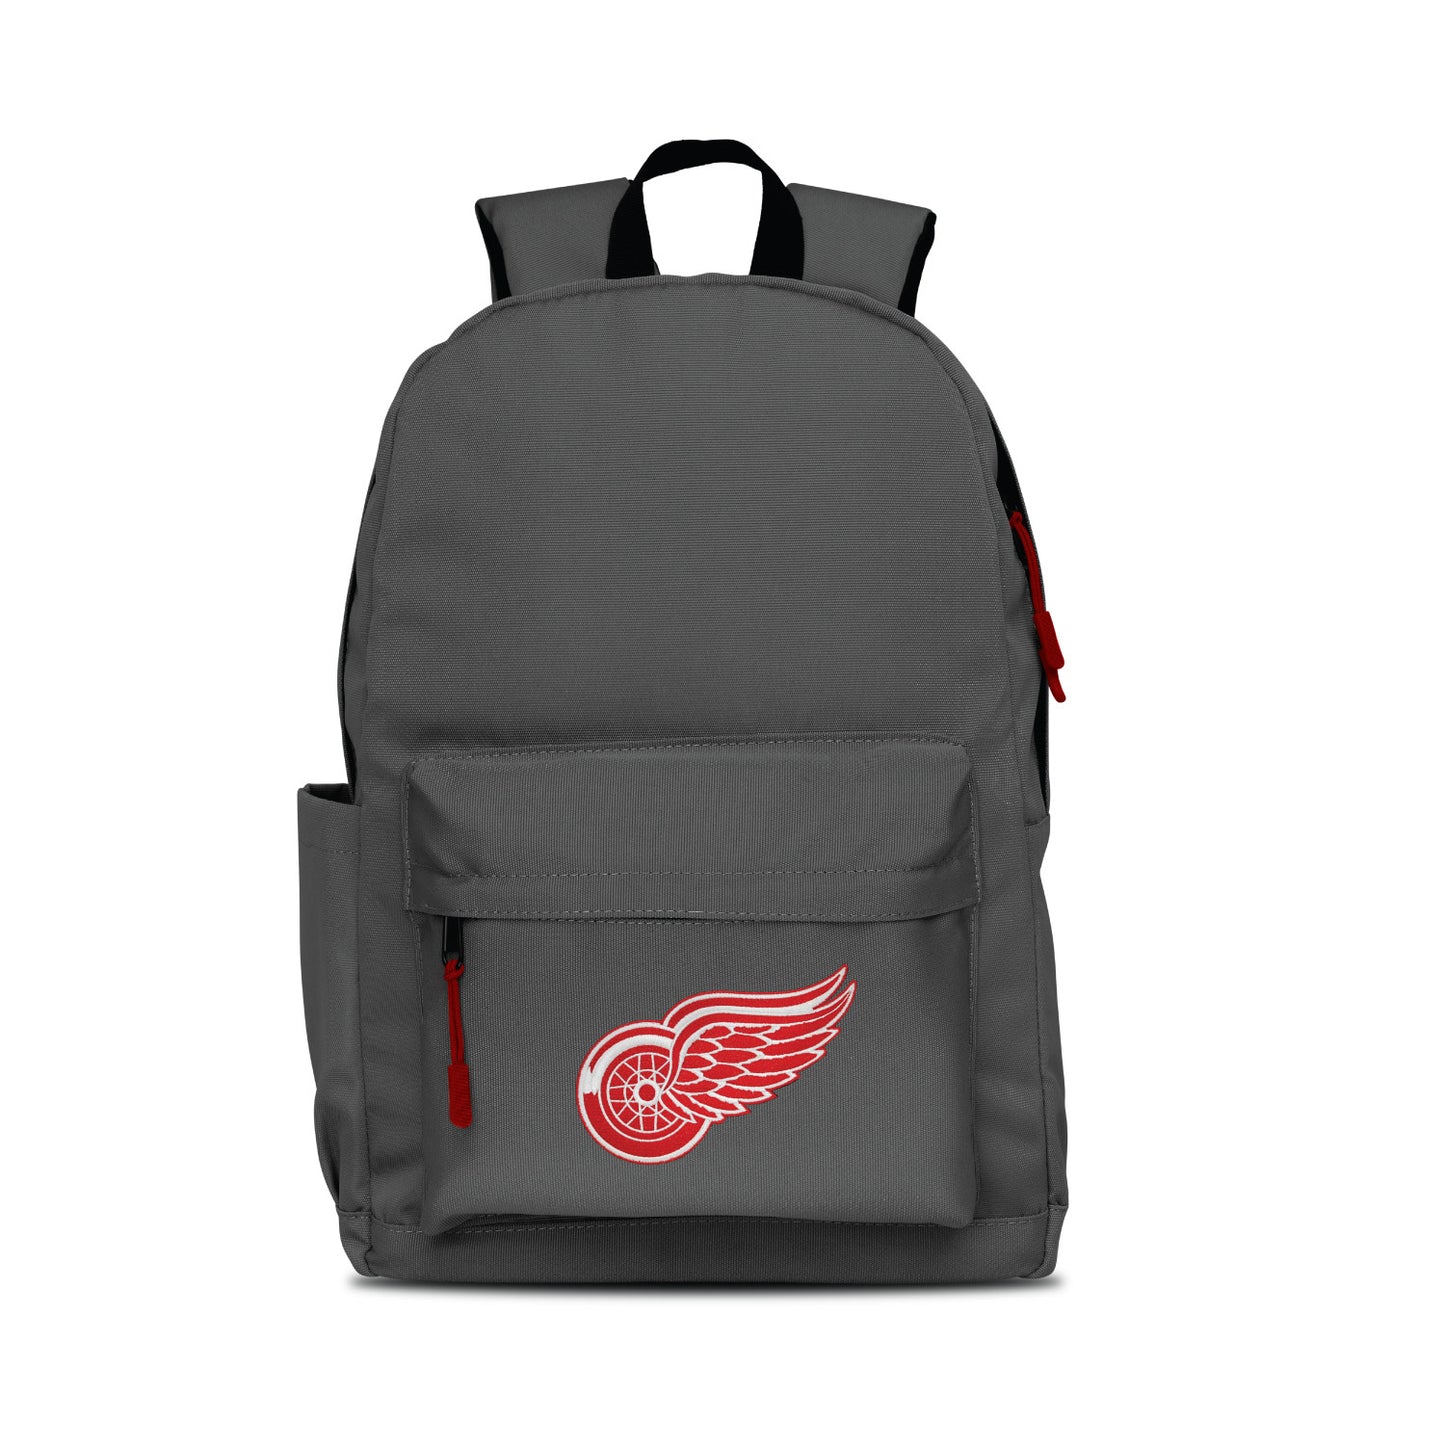 Detroit Red Wings Campus Laptop Backpack- Gray